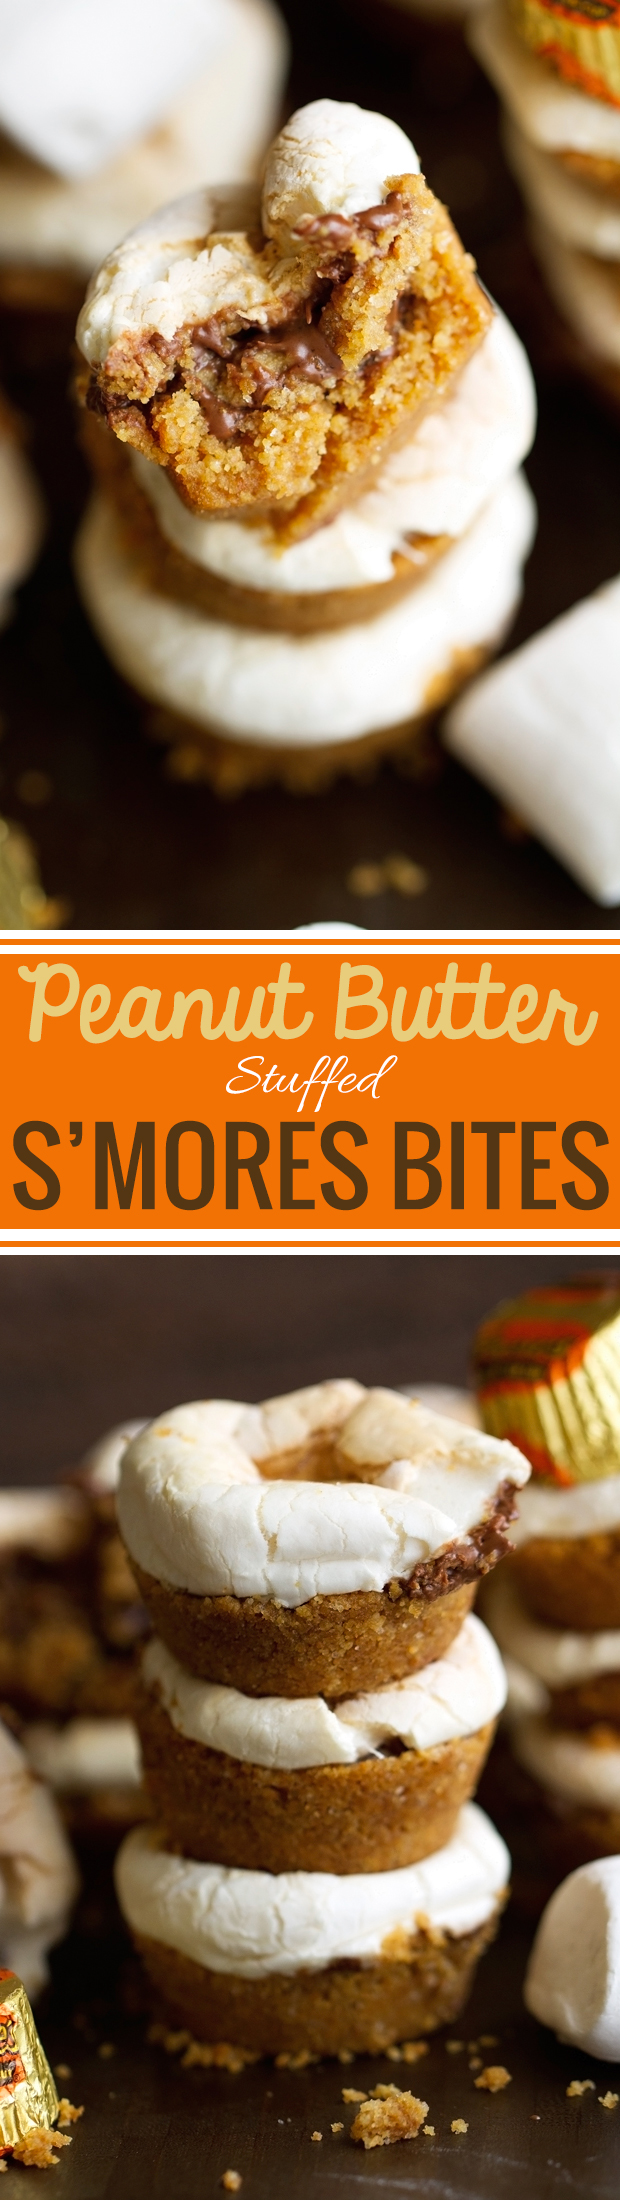 5 Ingredient Peanut Butter Stuffed S'mores Bites - These contain a peanut butter cup in the center and are so delish! #smoresbites #smores #peanutbutter #peanutbuttercups | Littlespicejar.com